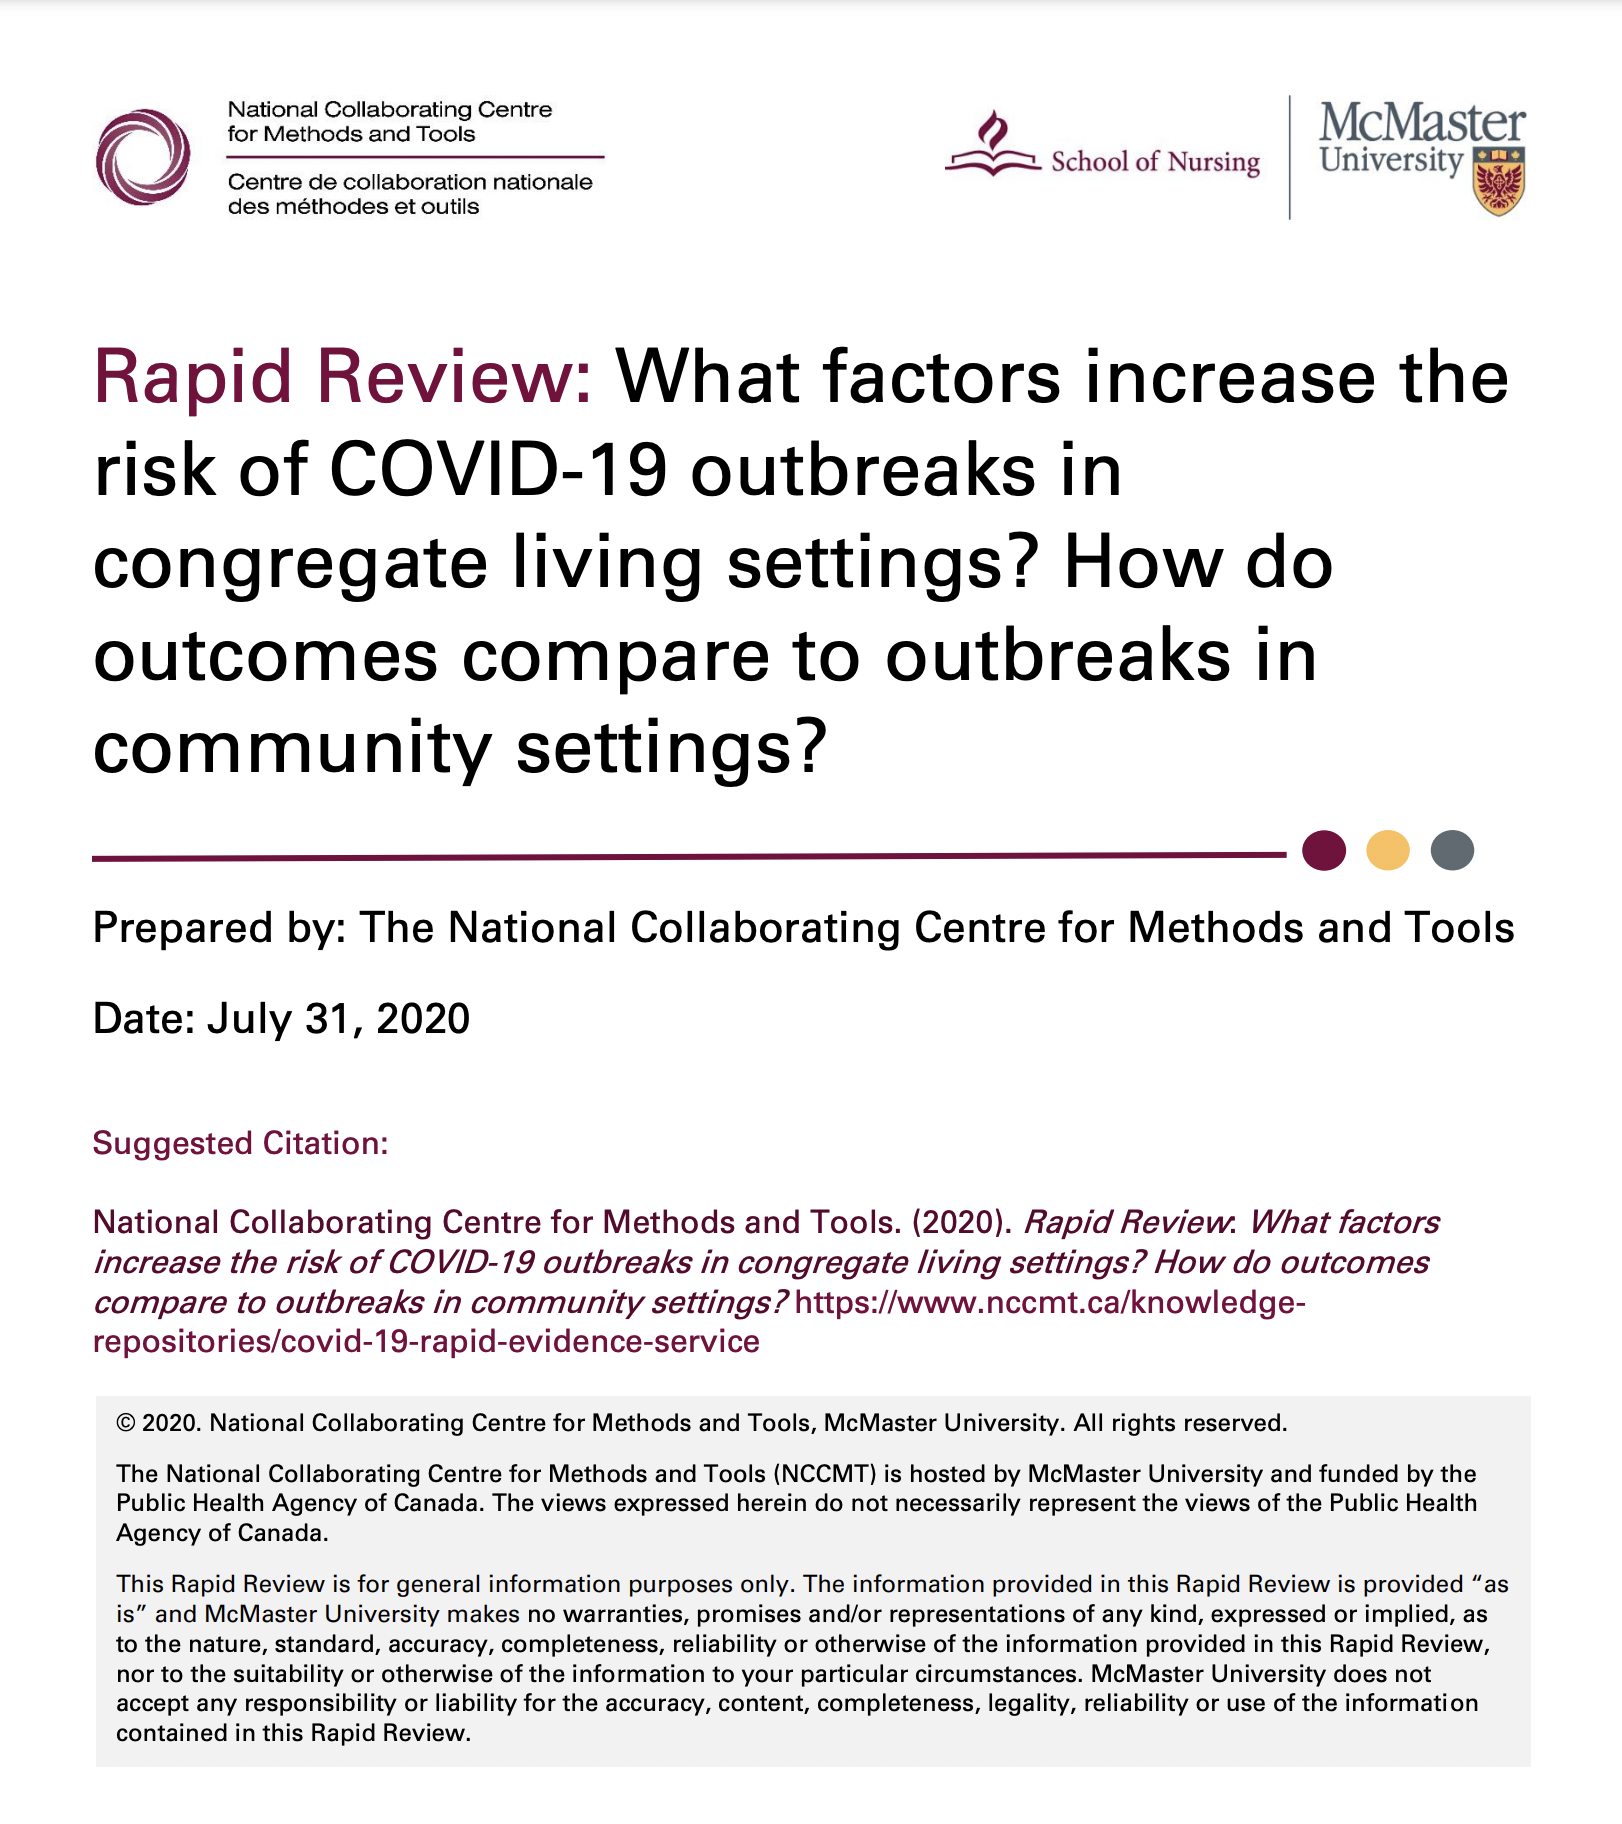 Rapid Review: What factors increase the risk of COVID-19 outbreaks in congregate living settings? How do outcomes compare to outbreaks in community settings?